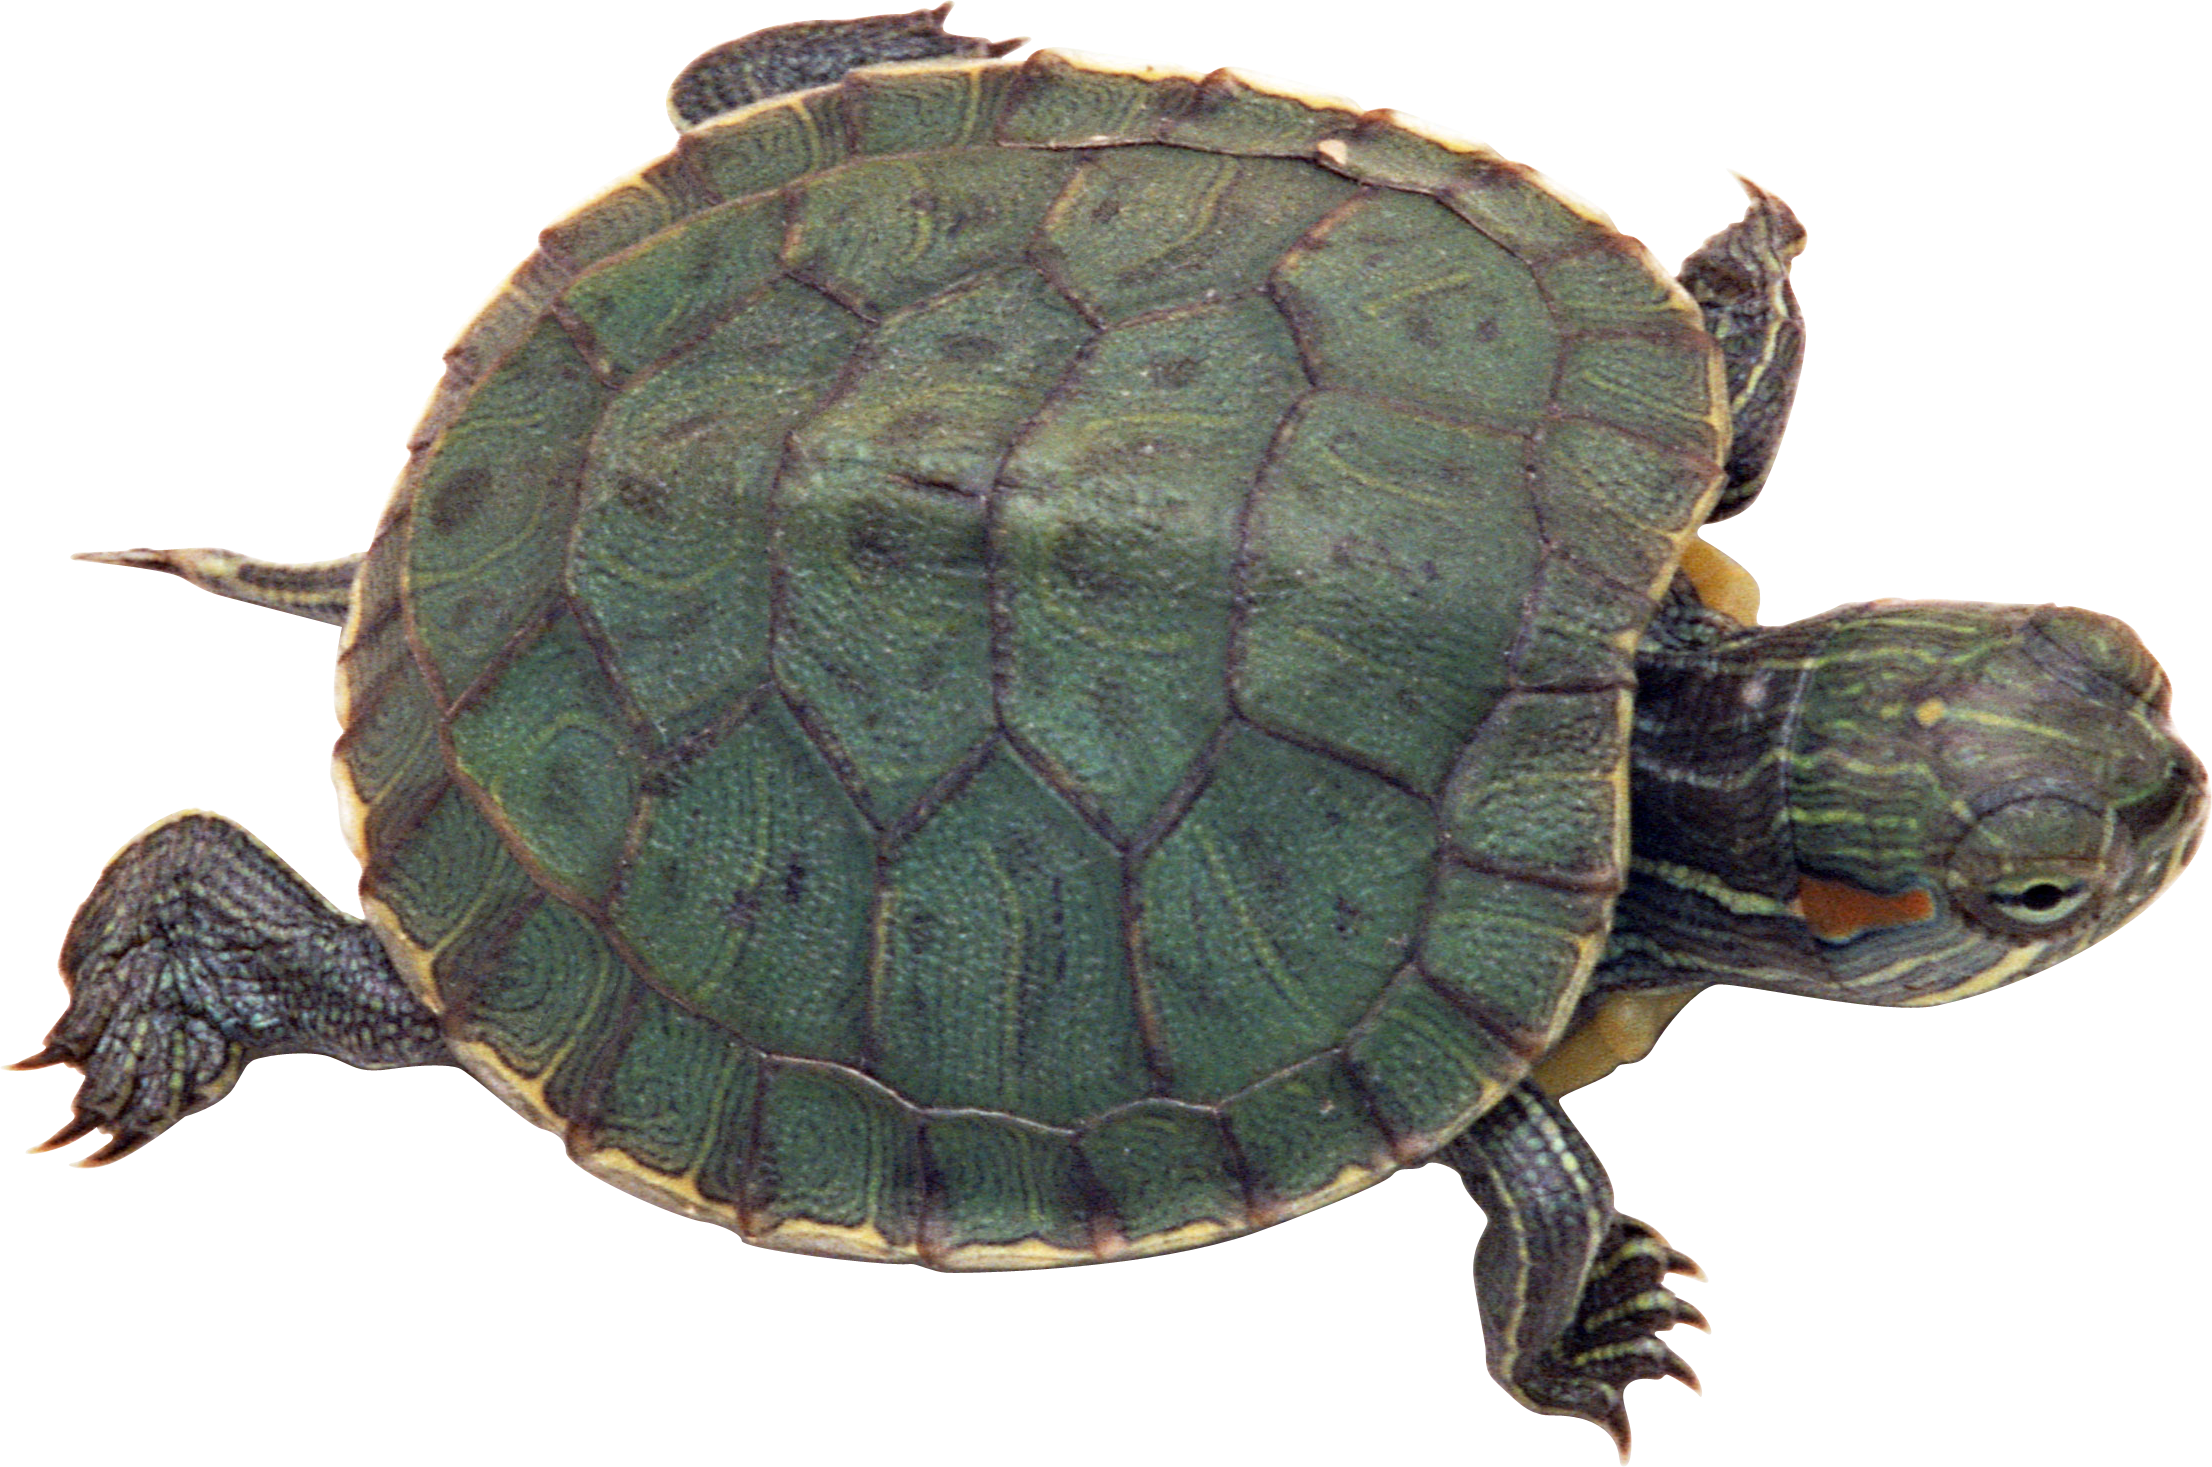 PNG Turtle Pictures-PlusPNG.c